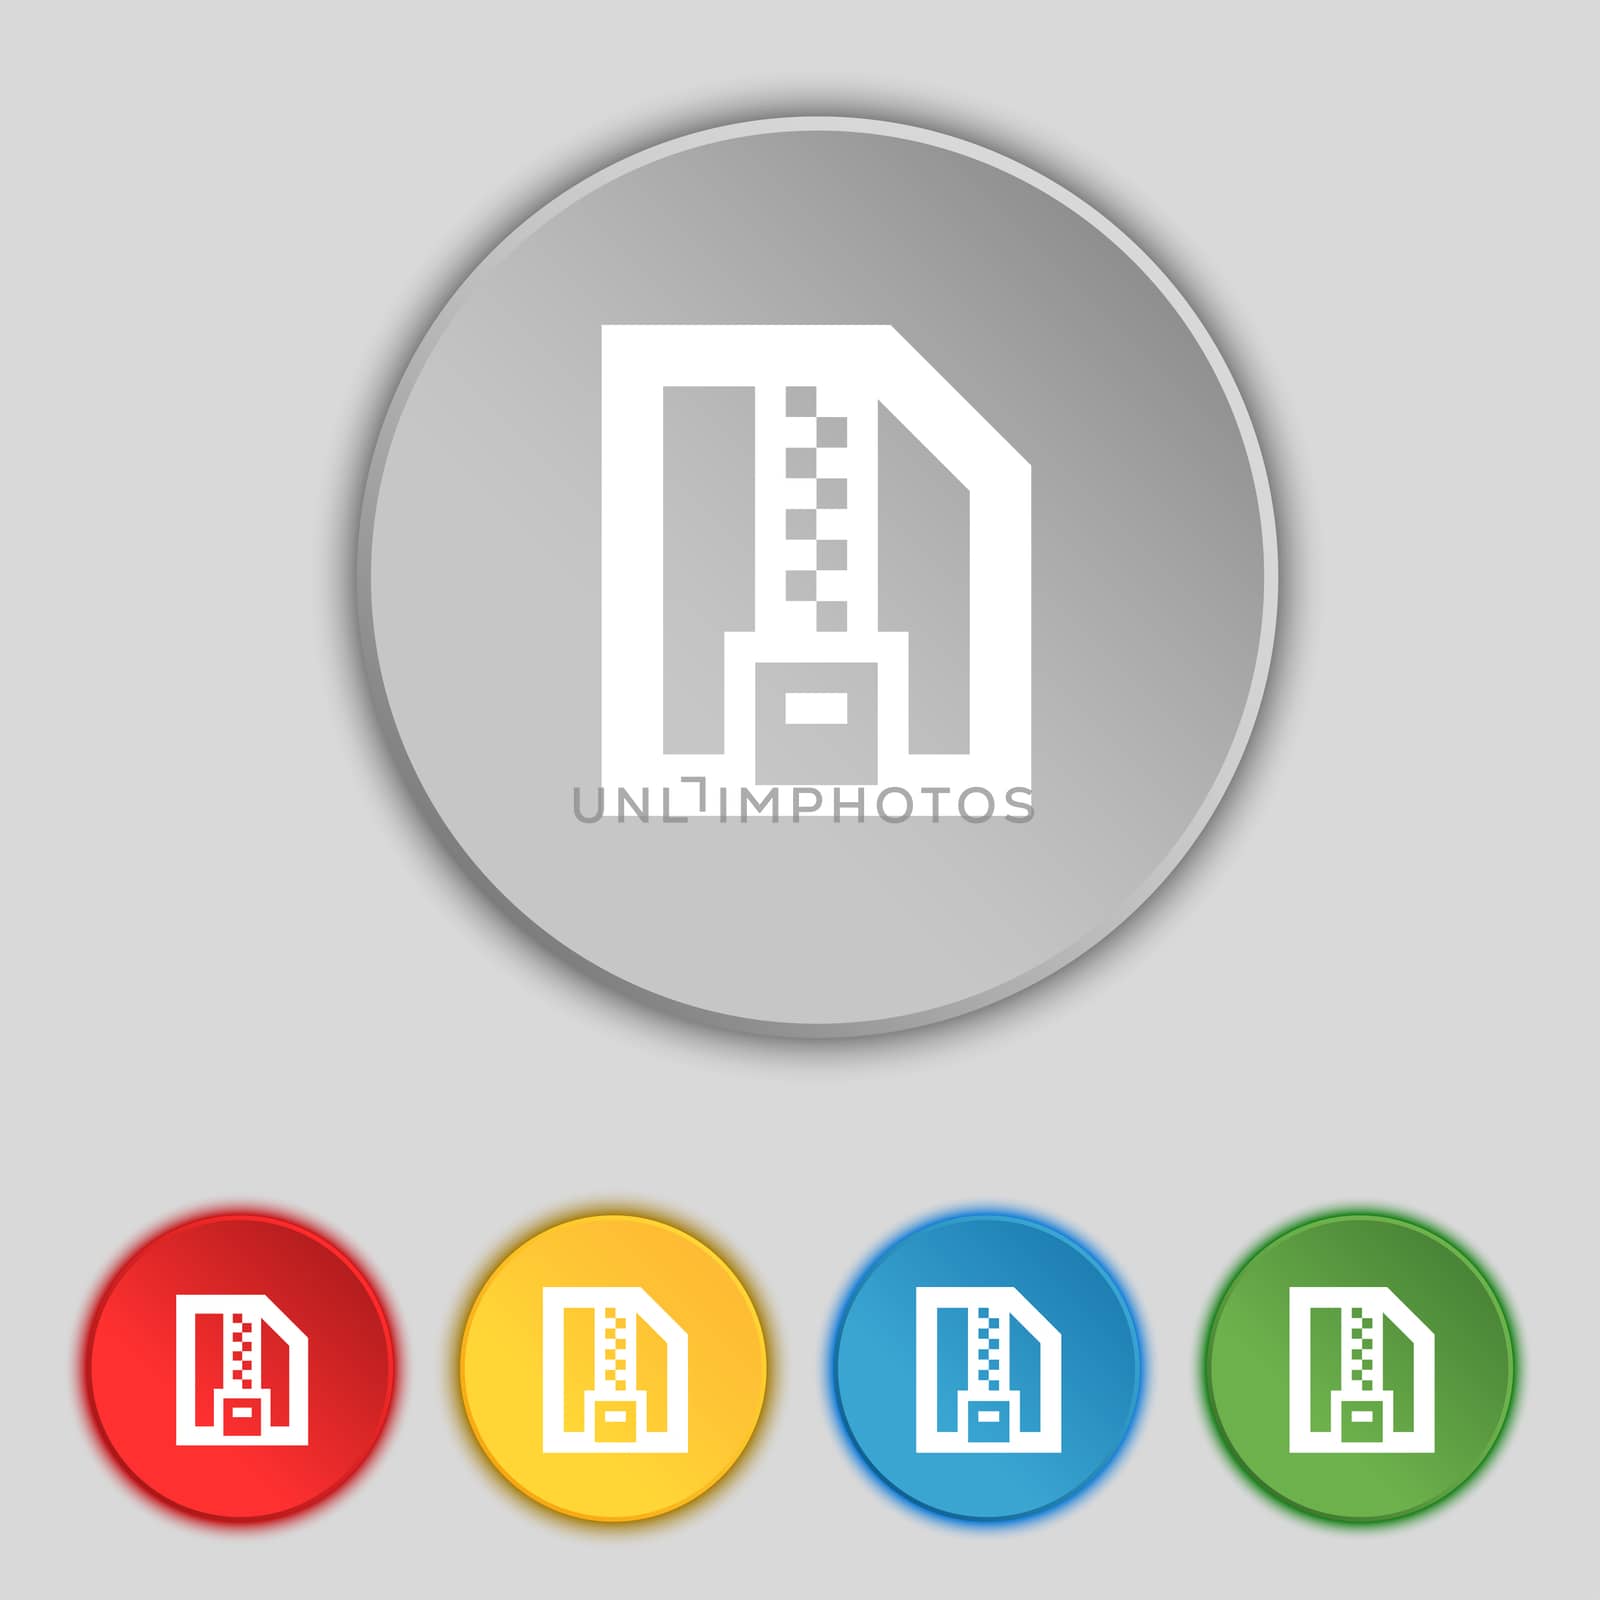 Archive file, Download compressed, ZIP zipped icon sign. Symbol on five flat buttons.  by serhii_lohvyniuk